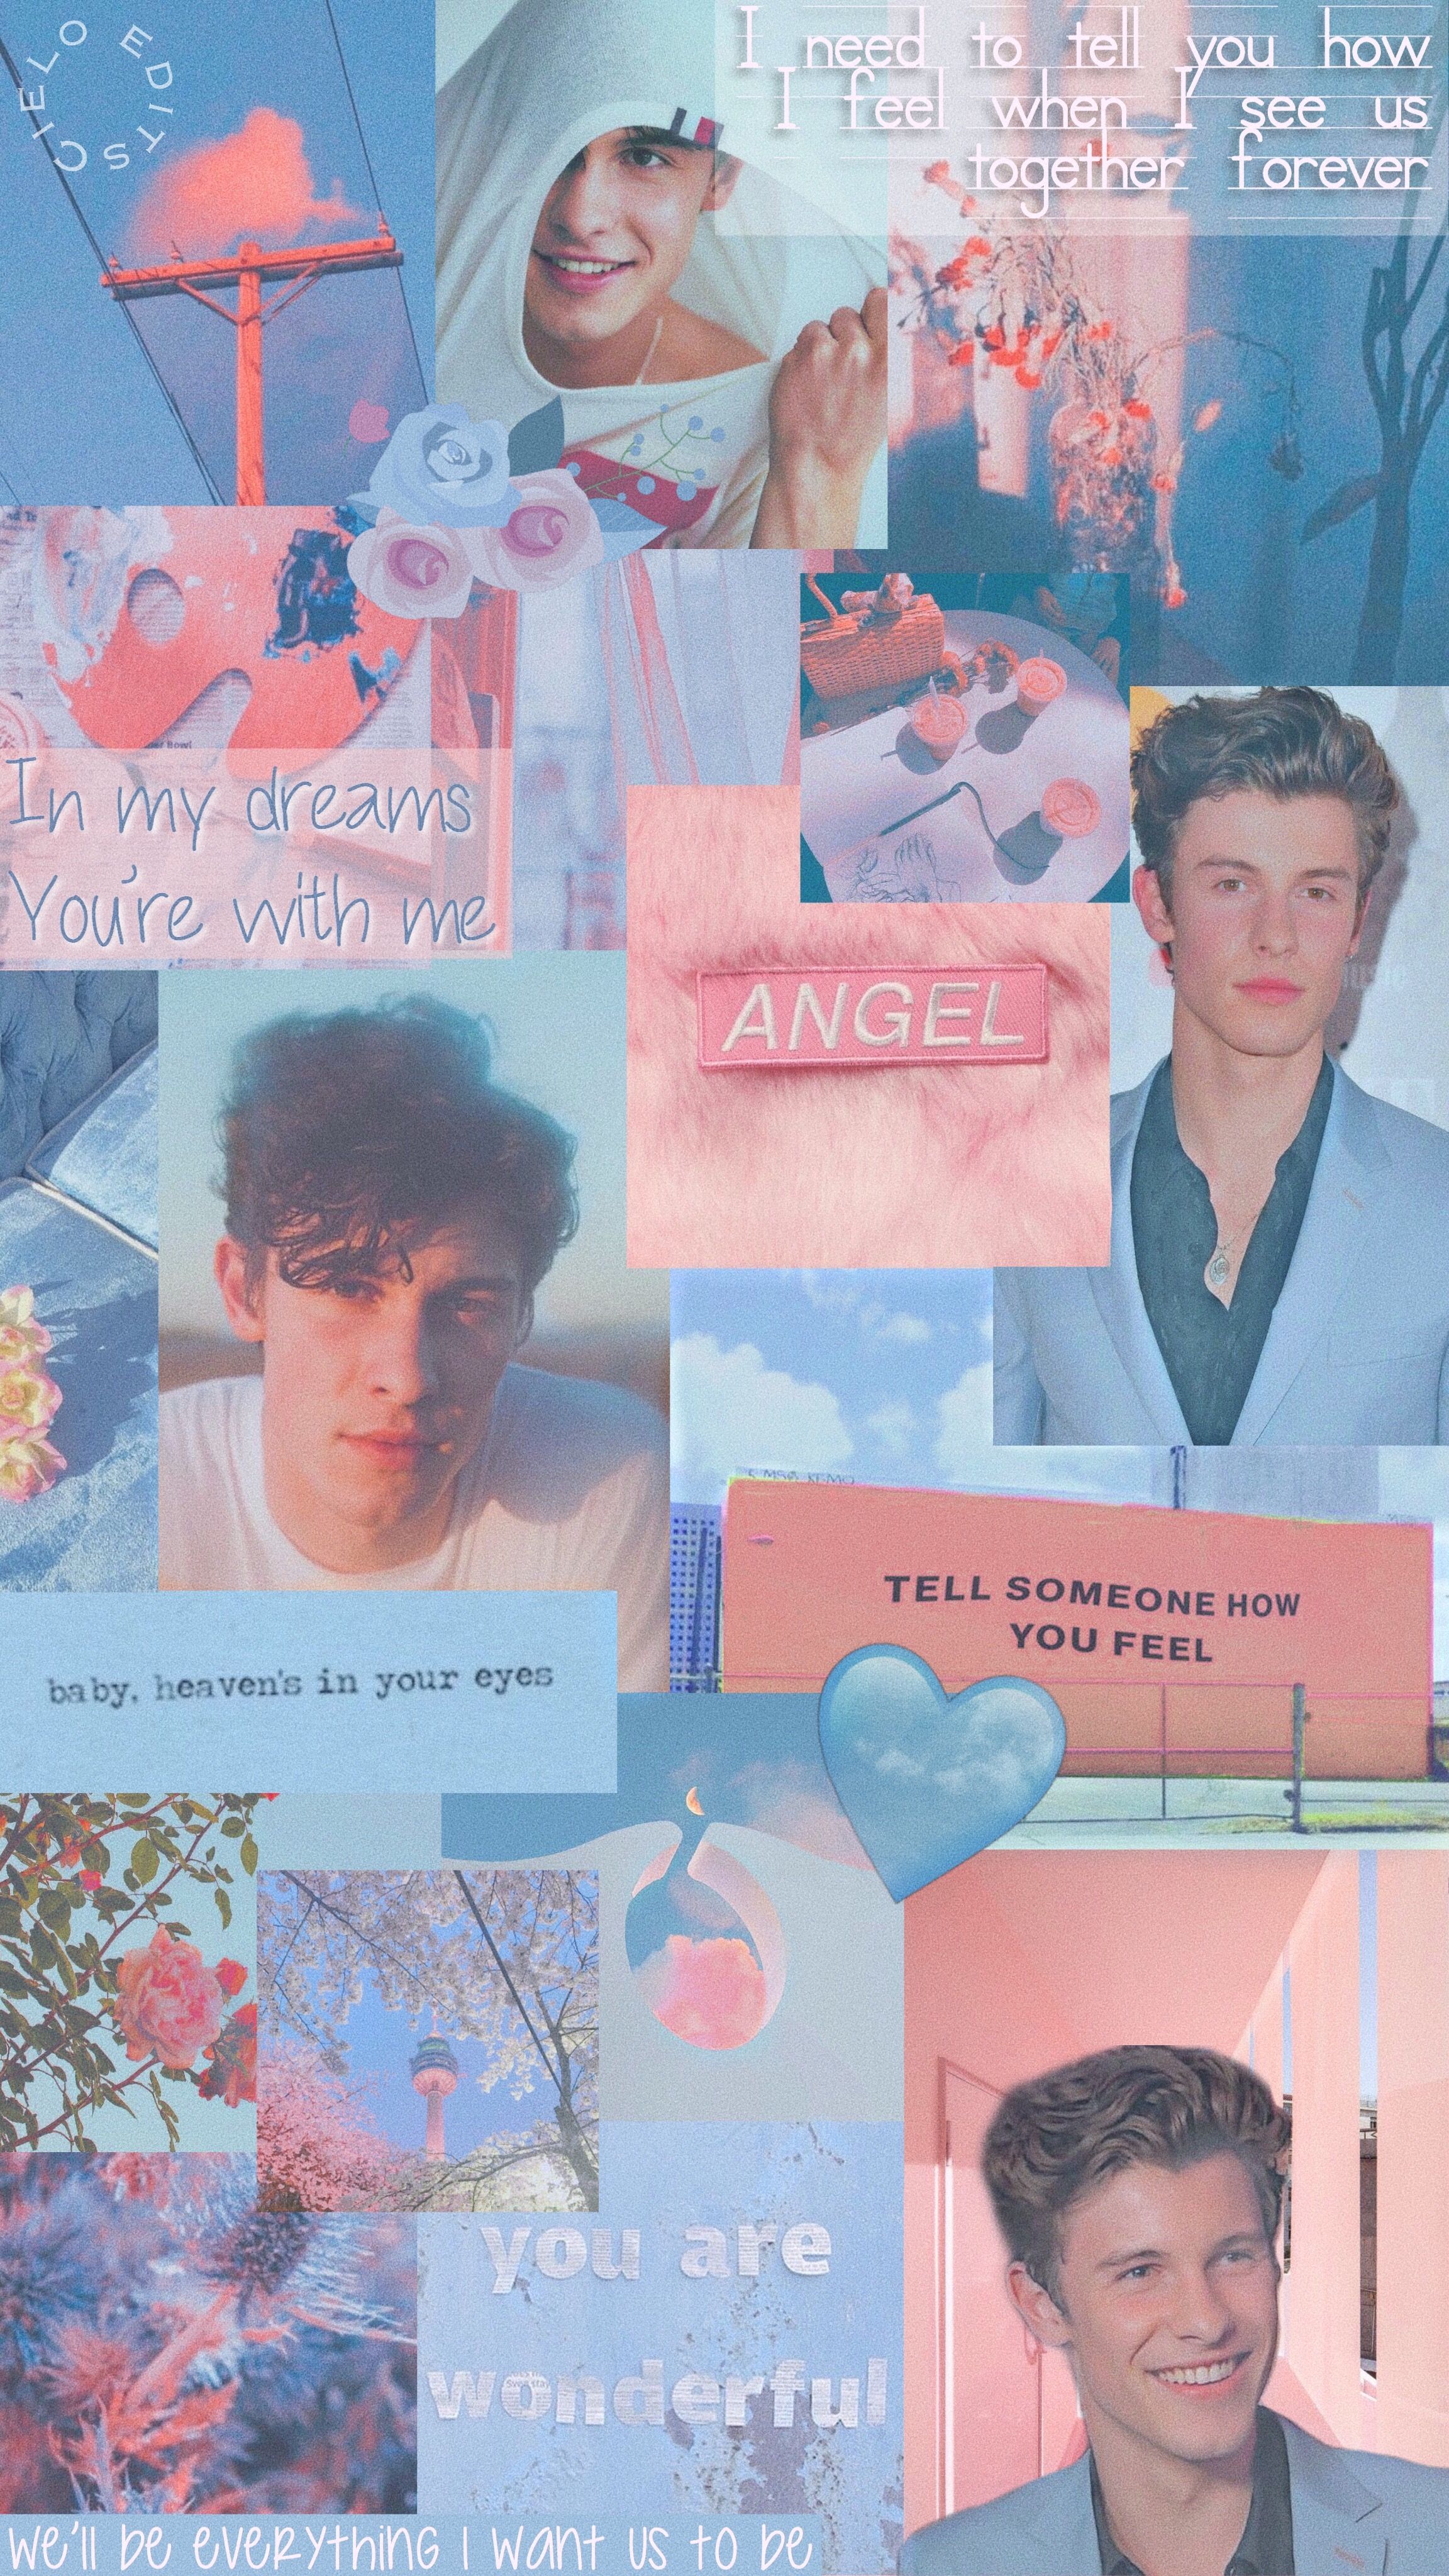 Shawn Mendes wallpaper. Pink and lightblue Aesthetic. Shawn mendes wallpaper, Shawn mendes songs, Shawn mendes